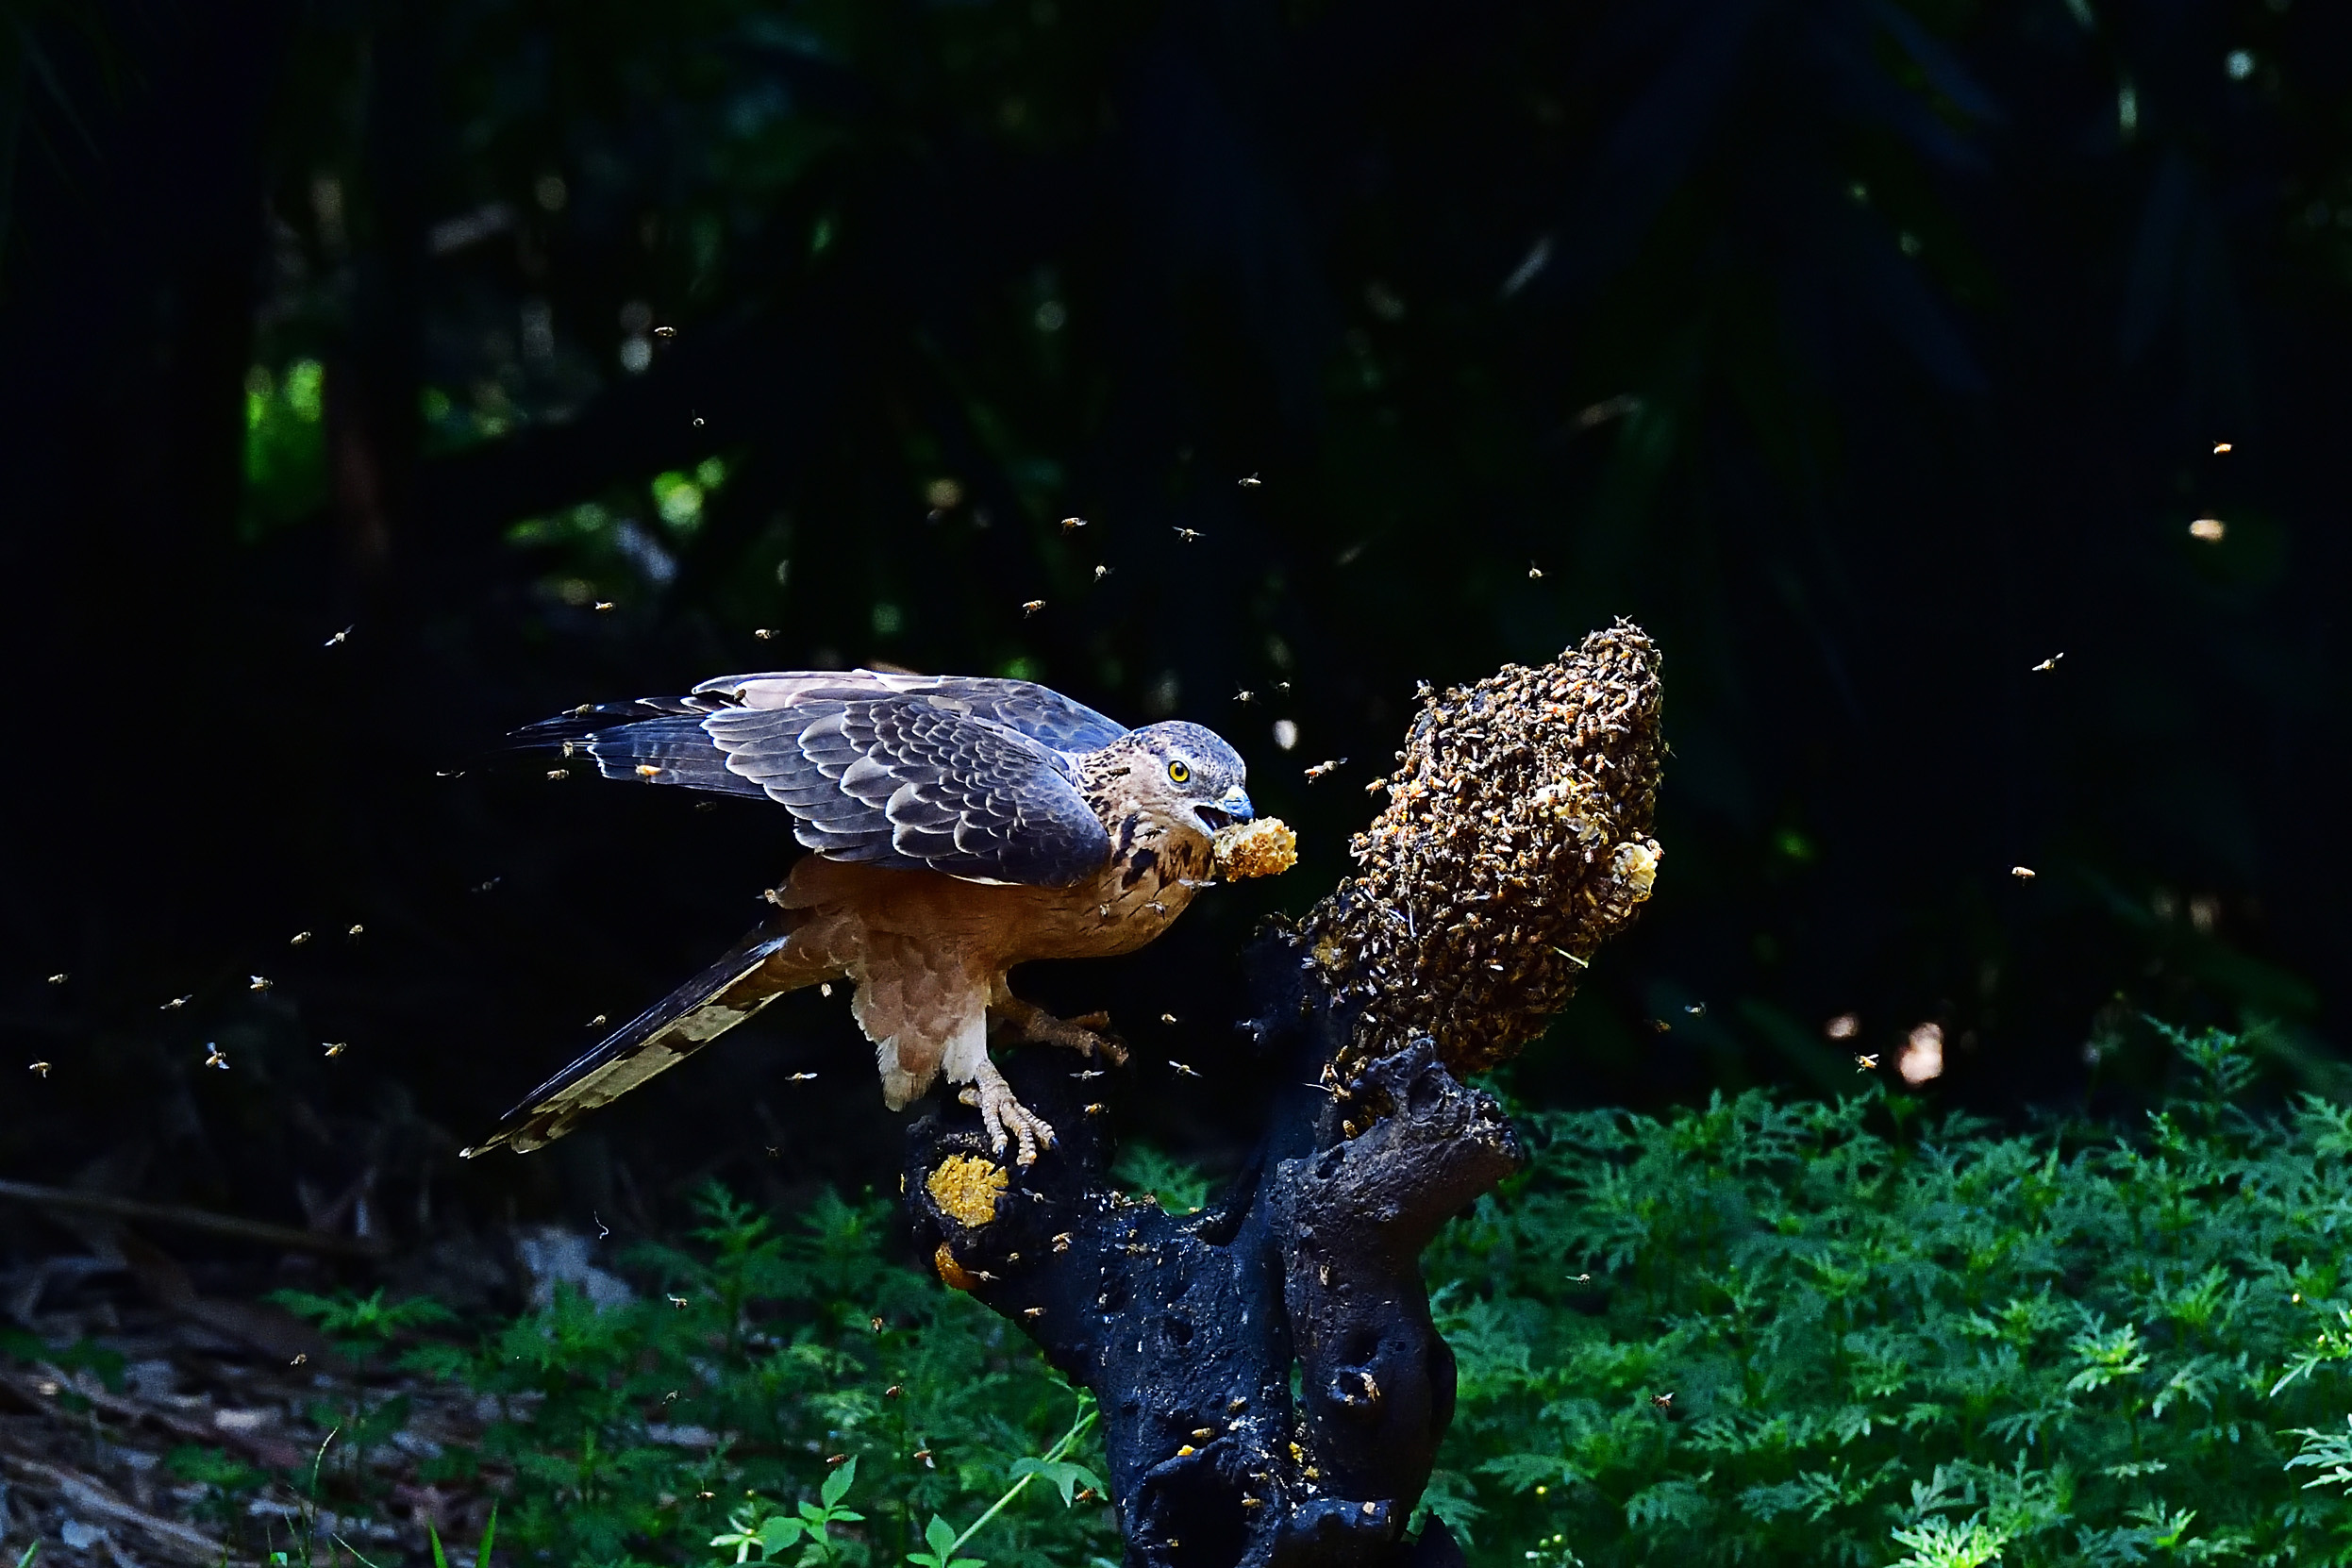 A male Honey Buzzard eating honey from bees nest.